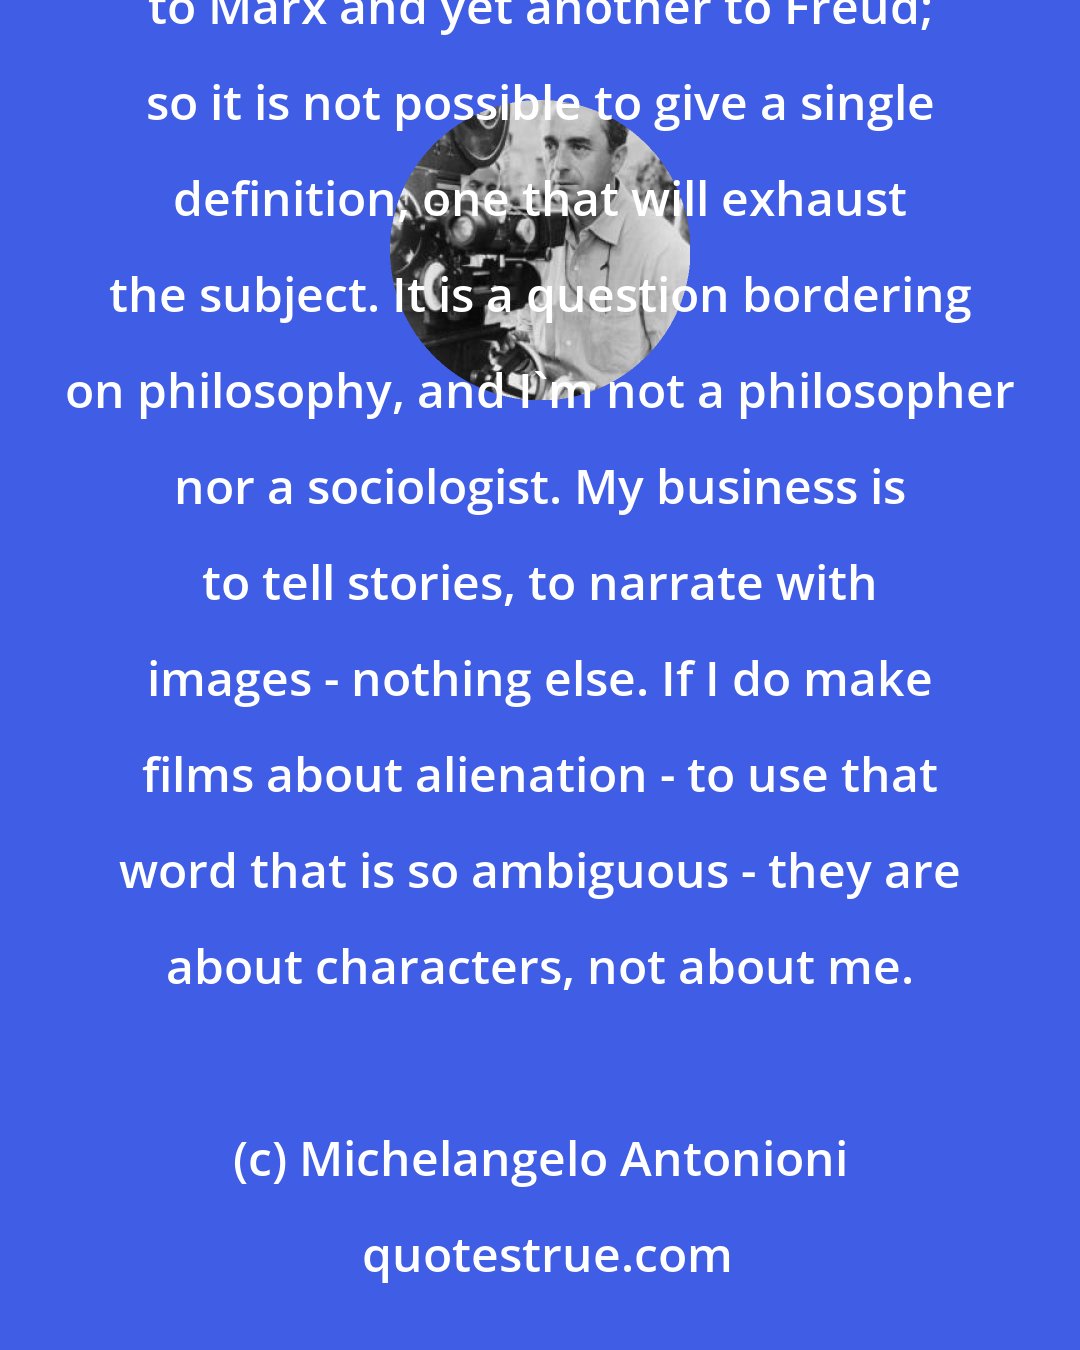 Michelangelo Antonioni: I never think in terms of alienation; it's the others who do. Alienation means one thing to Hegel, another to Marx and yet another to Freud; so it is not possible to give a single definition, one that will exhaust the subject. It is a question bordering on philosophy, and I'm not a philosopher nor a sociologist. My business is to tell stories, to narrate with images - nothing else. If I do make films about alienation - to use that word that is so ambiguous - they are about characters, not about me.